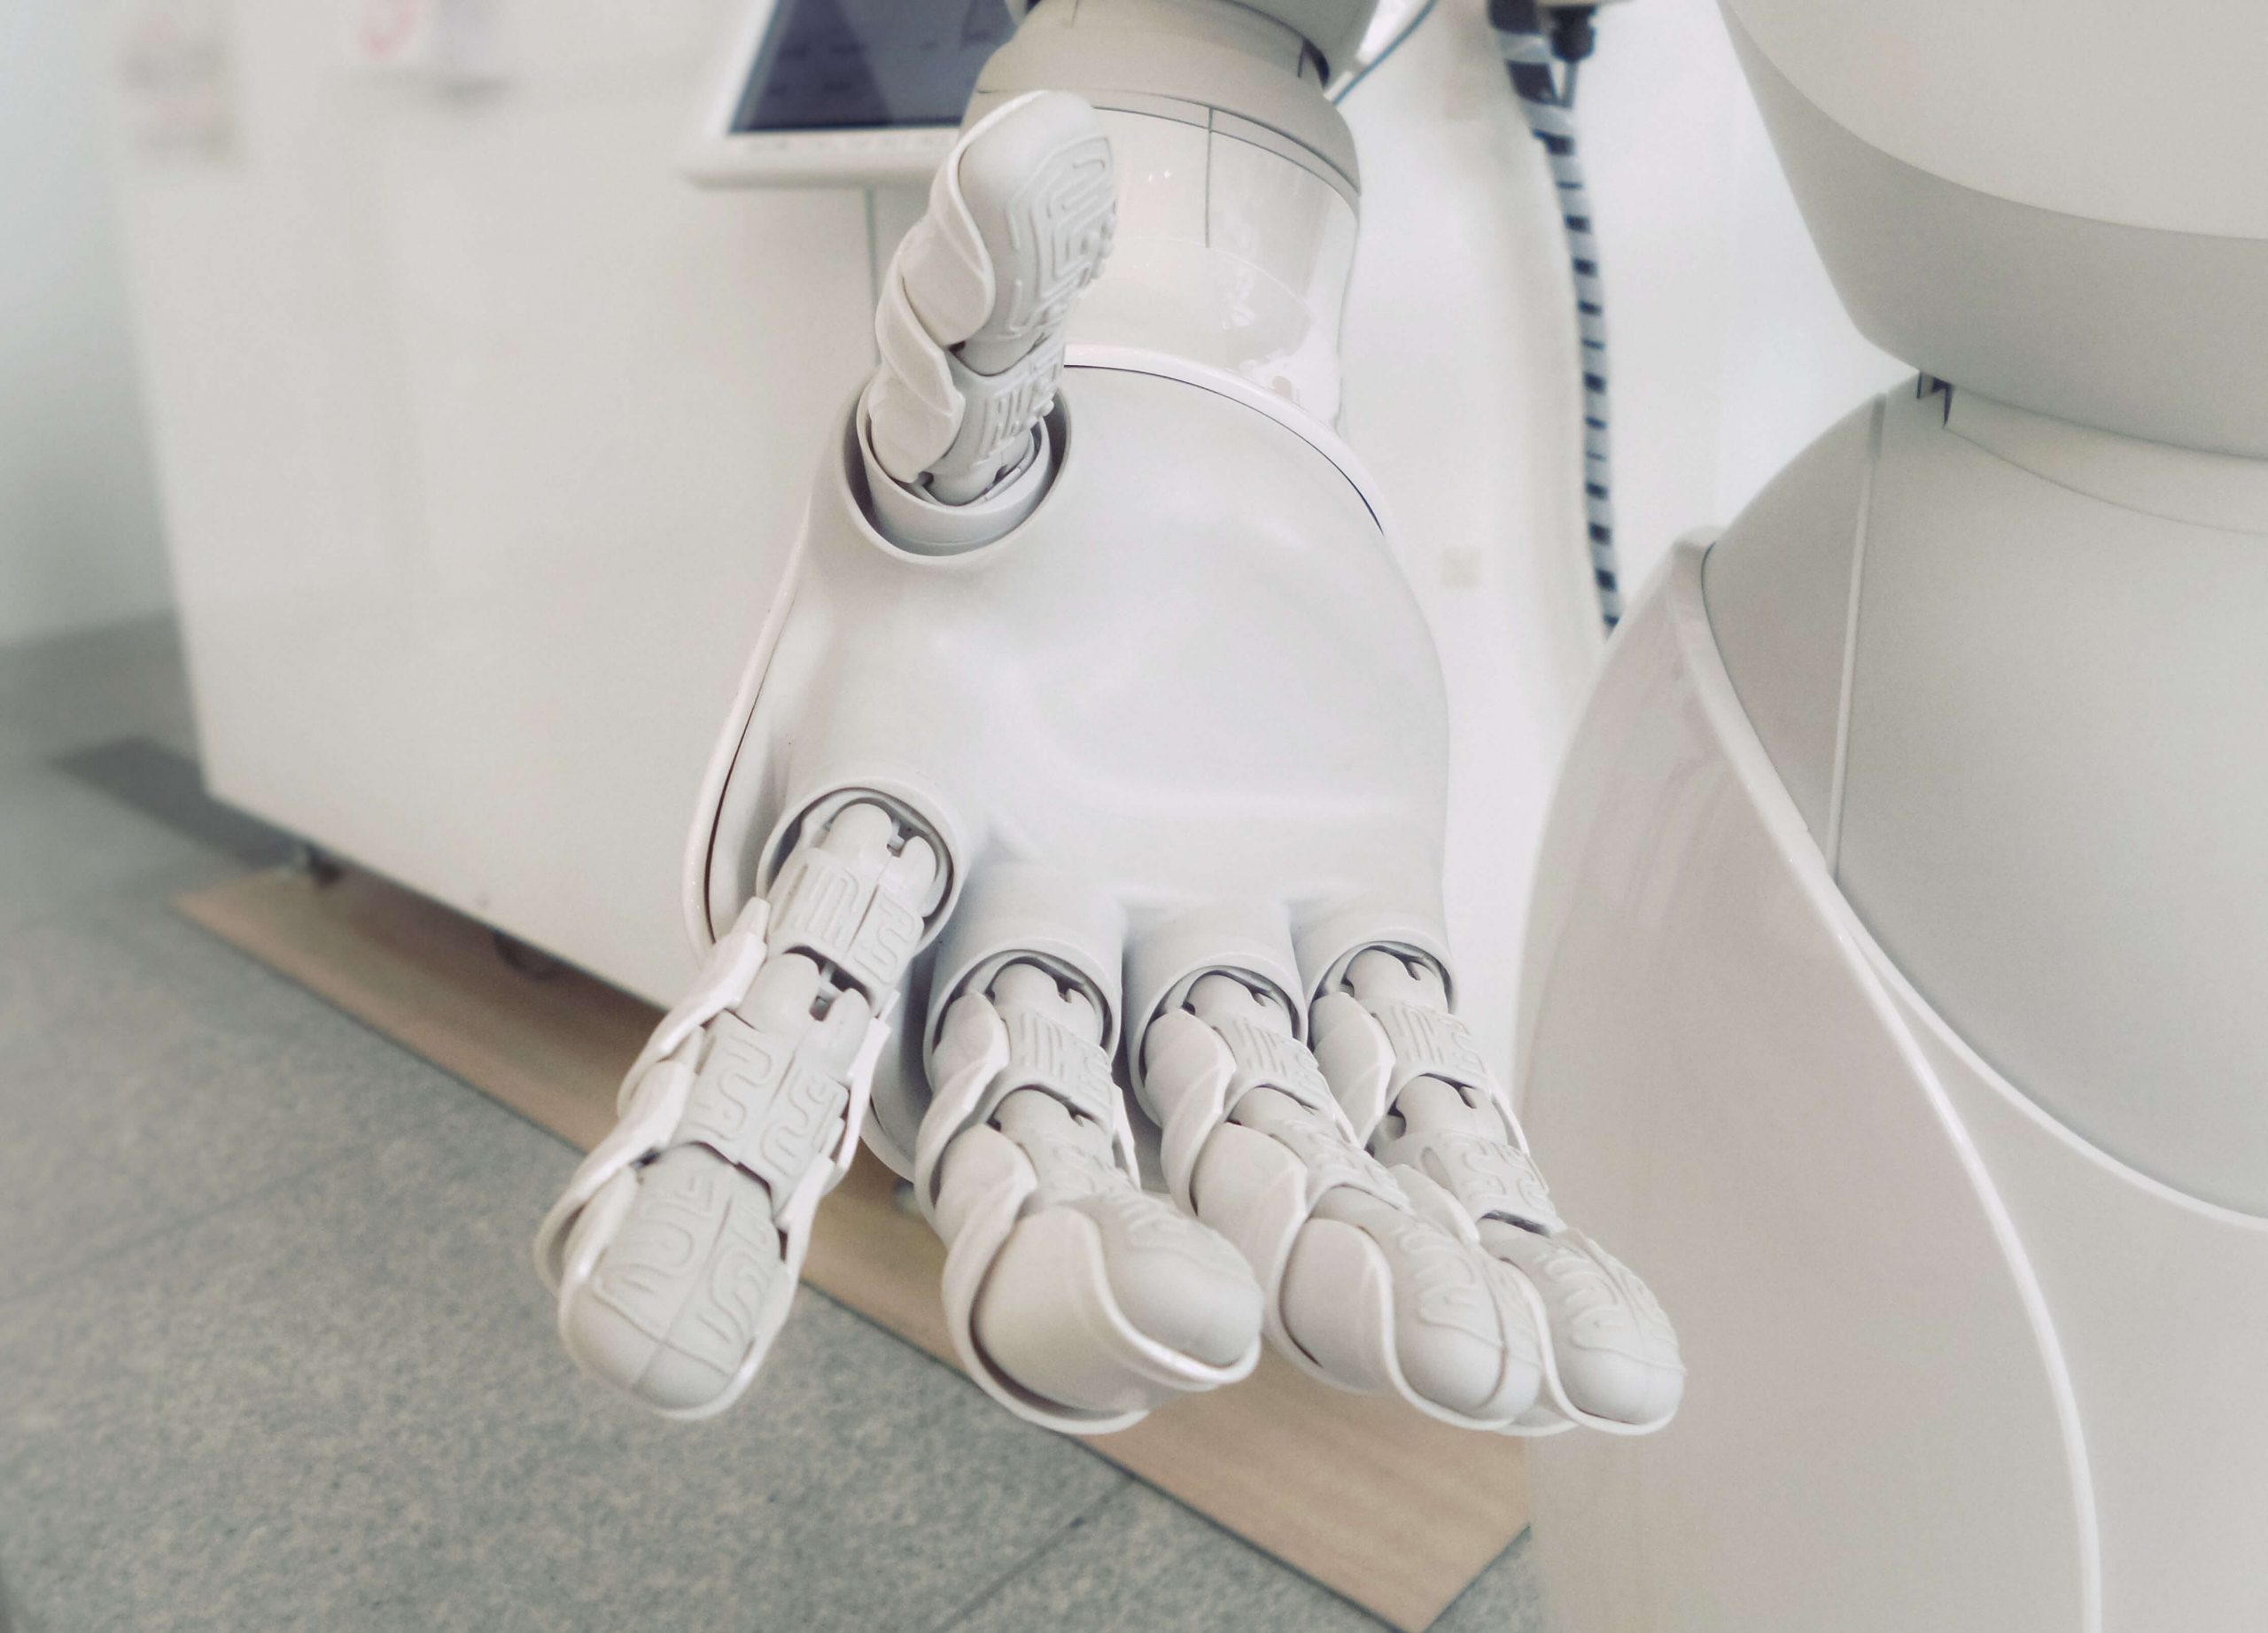 Close-up image of a white robotic hand.